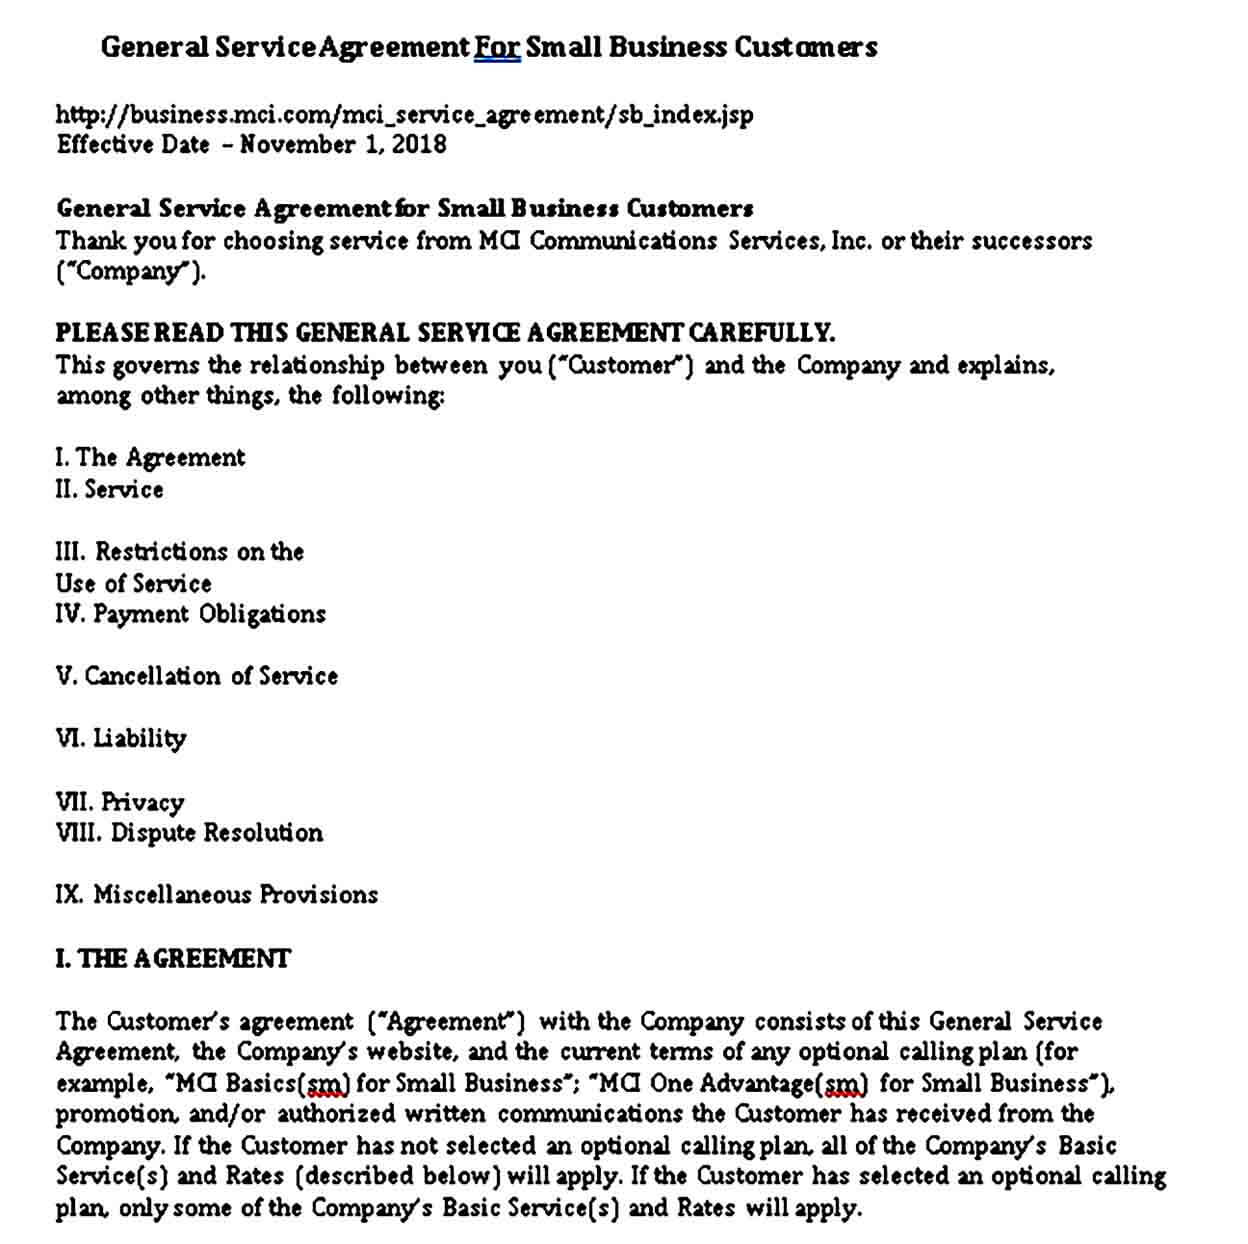 General Service Agreement for Small Business